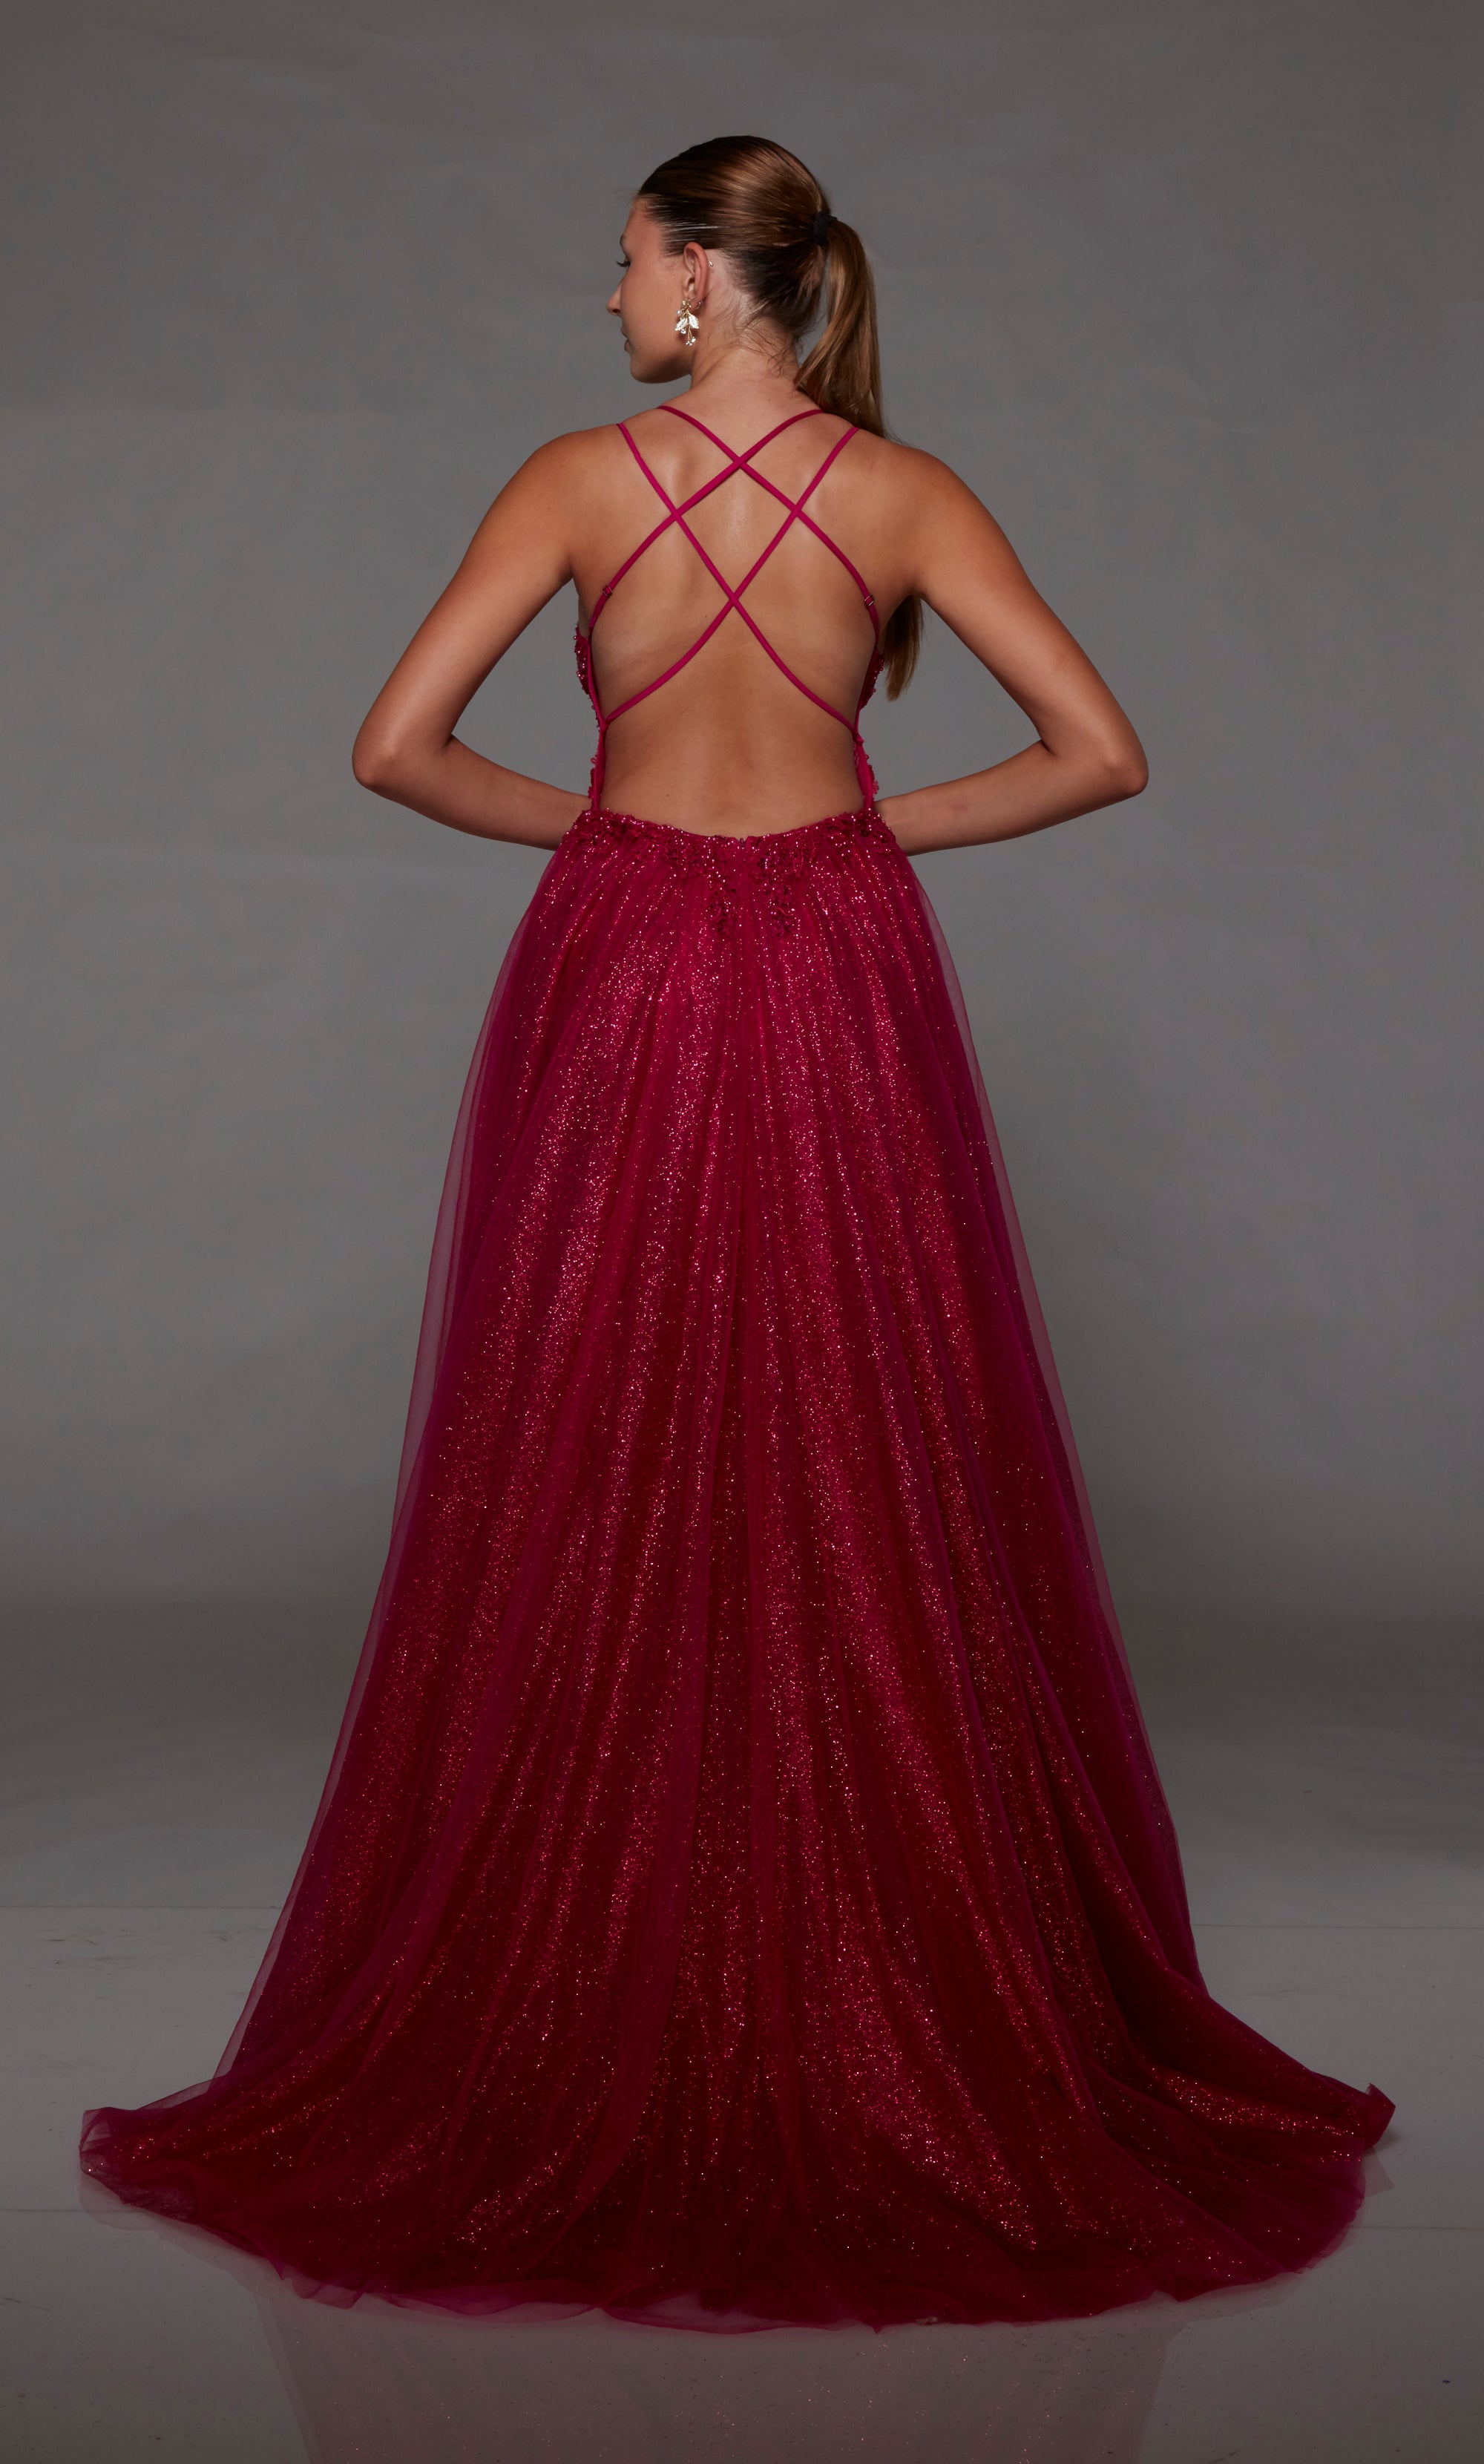 Fuchsia pink glitter tulle A-line prom dress: plunging V neckline, front slit, crisscross back straps, and train. A dazzling choice for an vibrant and stylish look.